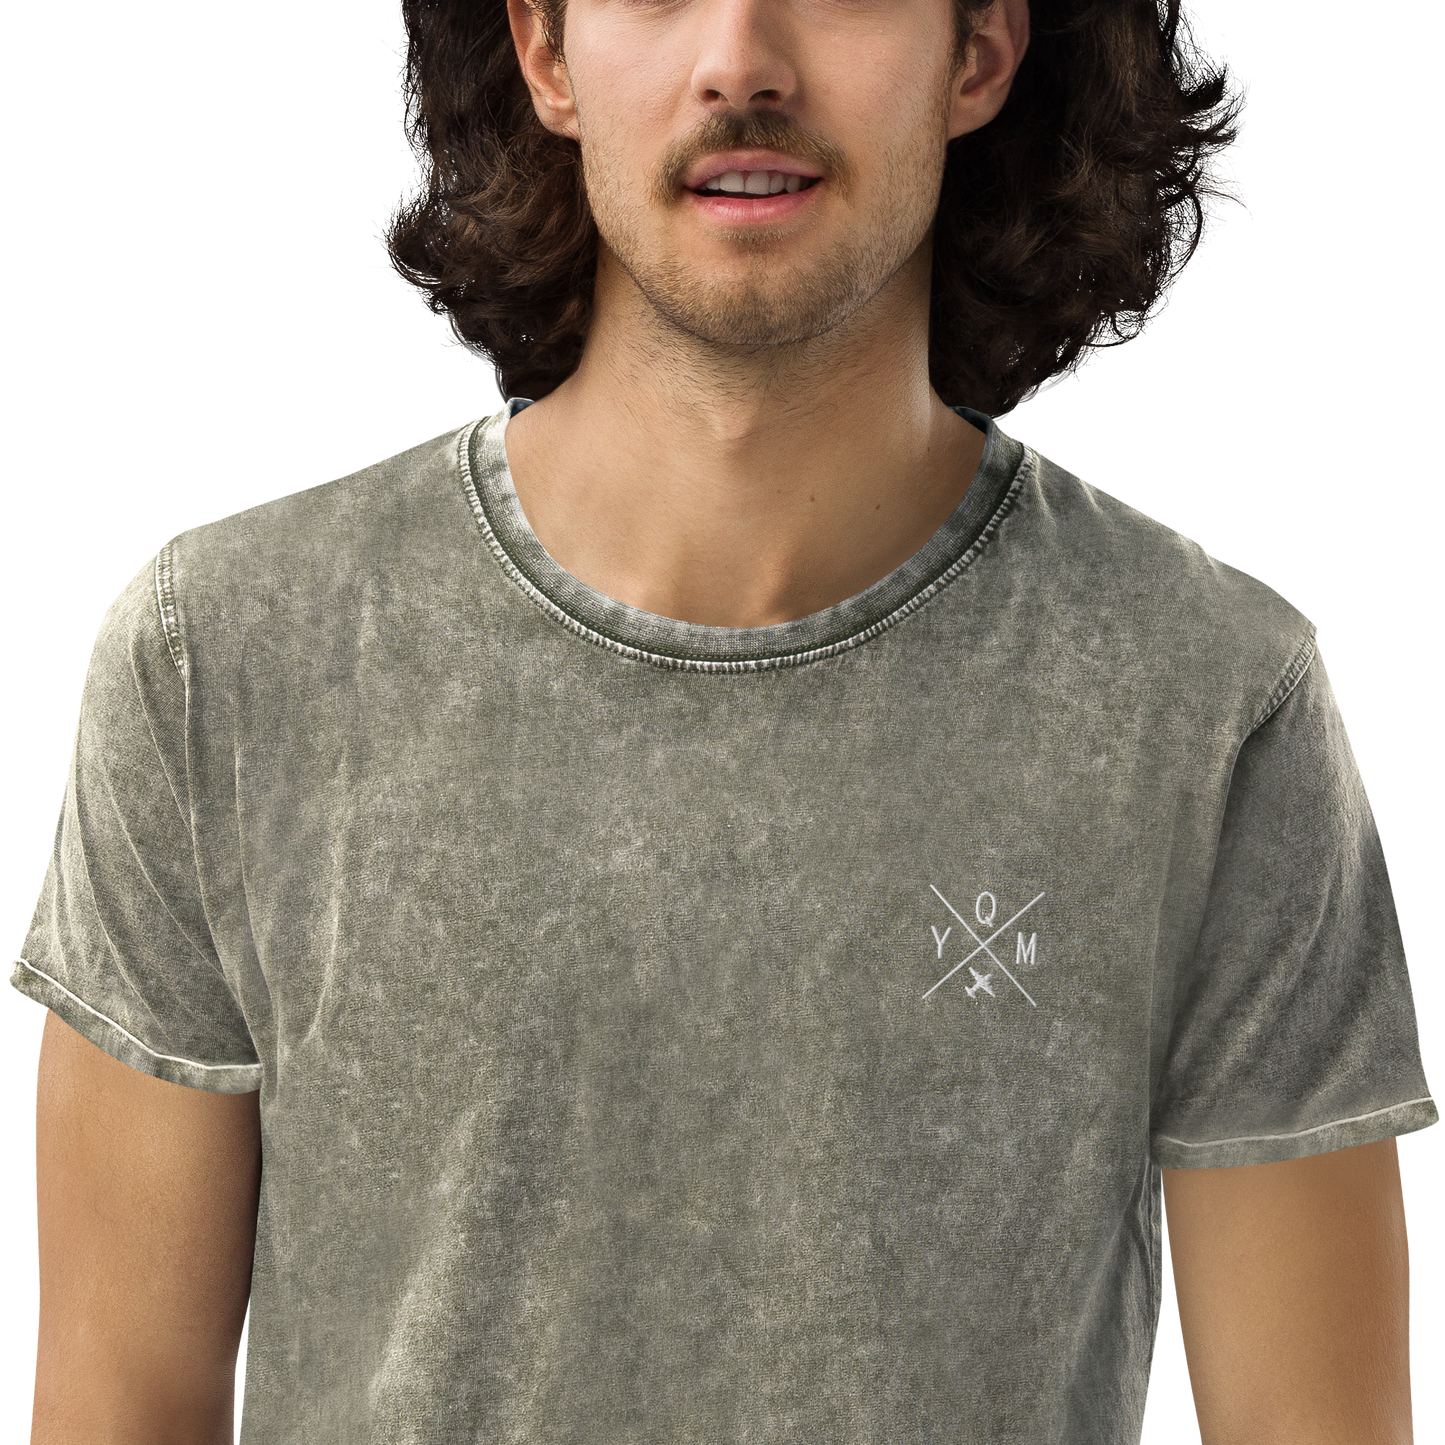 YHM Designs - YQM Moncton Denim T-Shirt - Crossed-X Design with Airport Code and Vintage Propliner - White Embroidery - Image 11